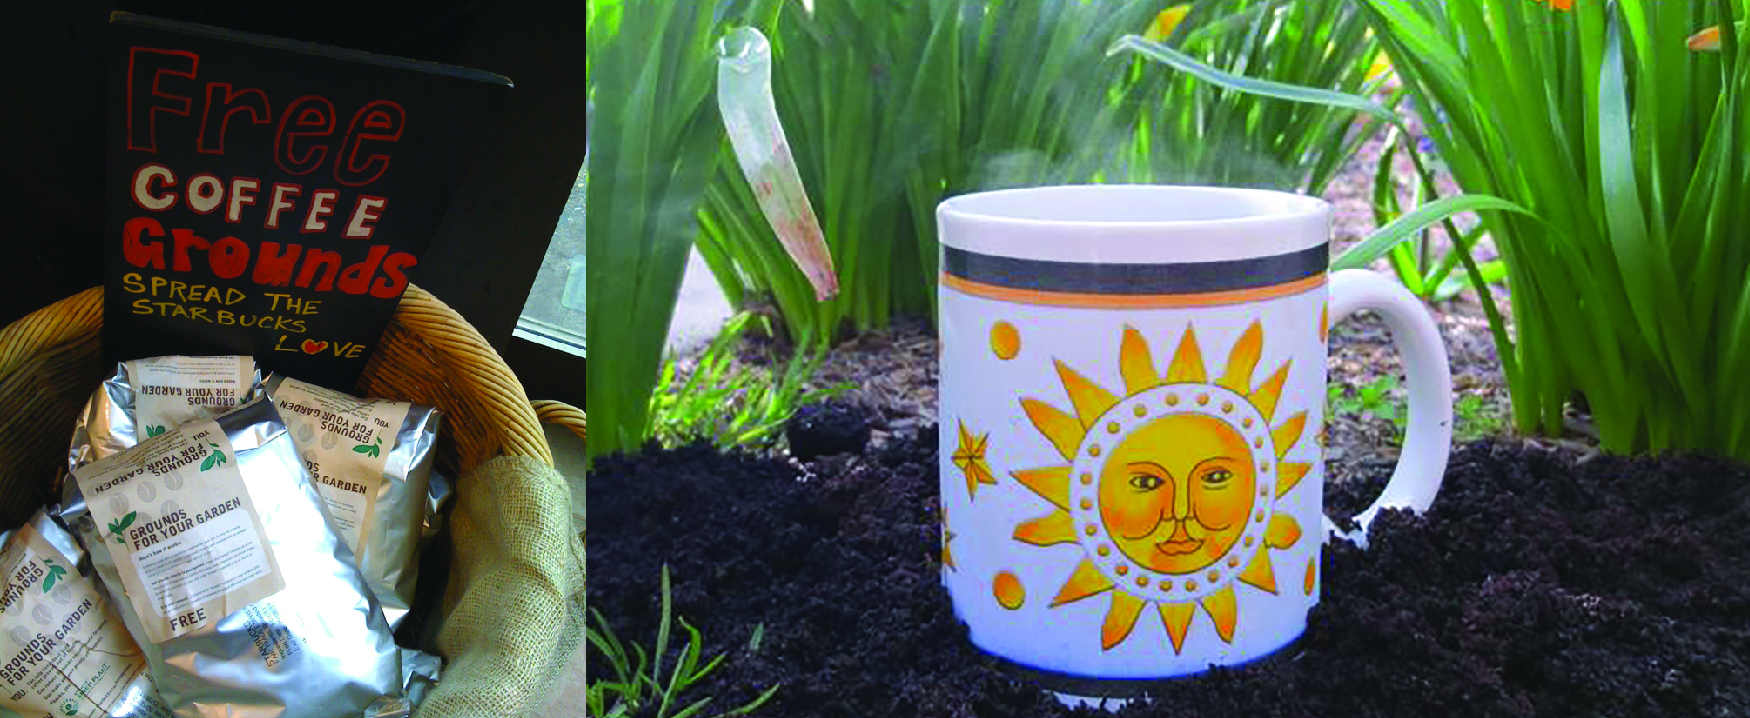 Image on the left shows a basket holding bags of coffee with a sign that says “Free coffee grounds. Spread the Starbucks love.” Image on the right shows a coffee mug sitting on the ground.